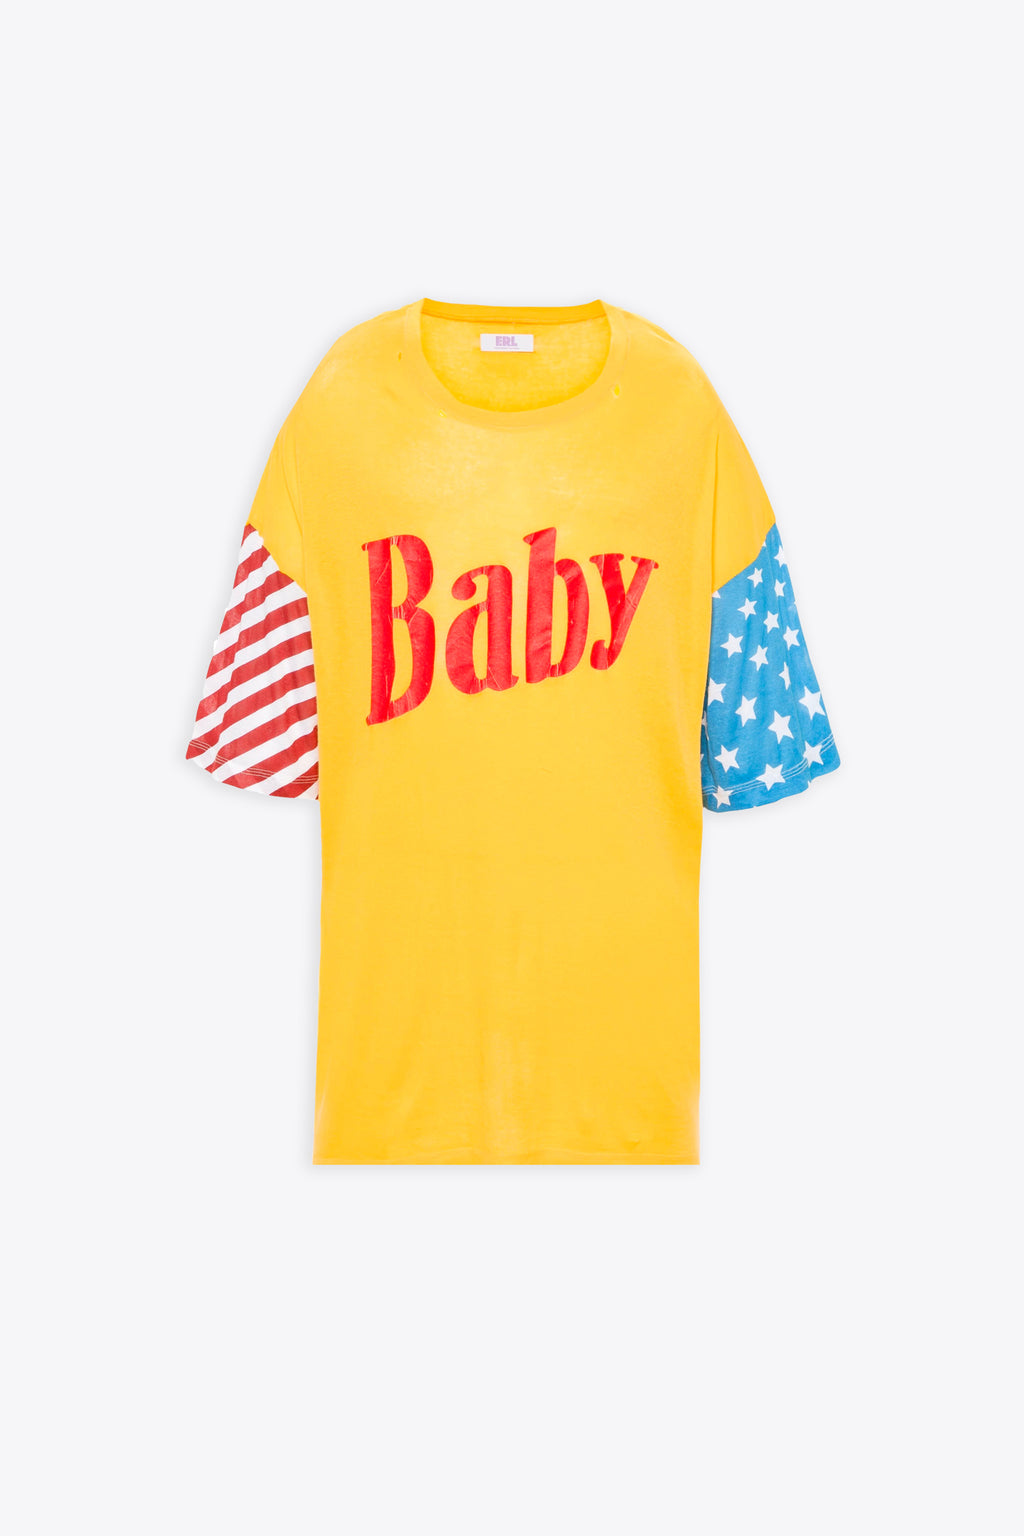 alt-image__T-shirt-oversize-gialla-in-cotone-con-rotture-e-stampa-Baby---Unisex-Printed-Light-Jersey-T-shirt